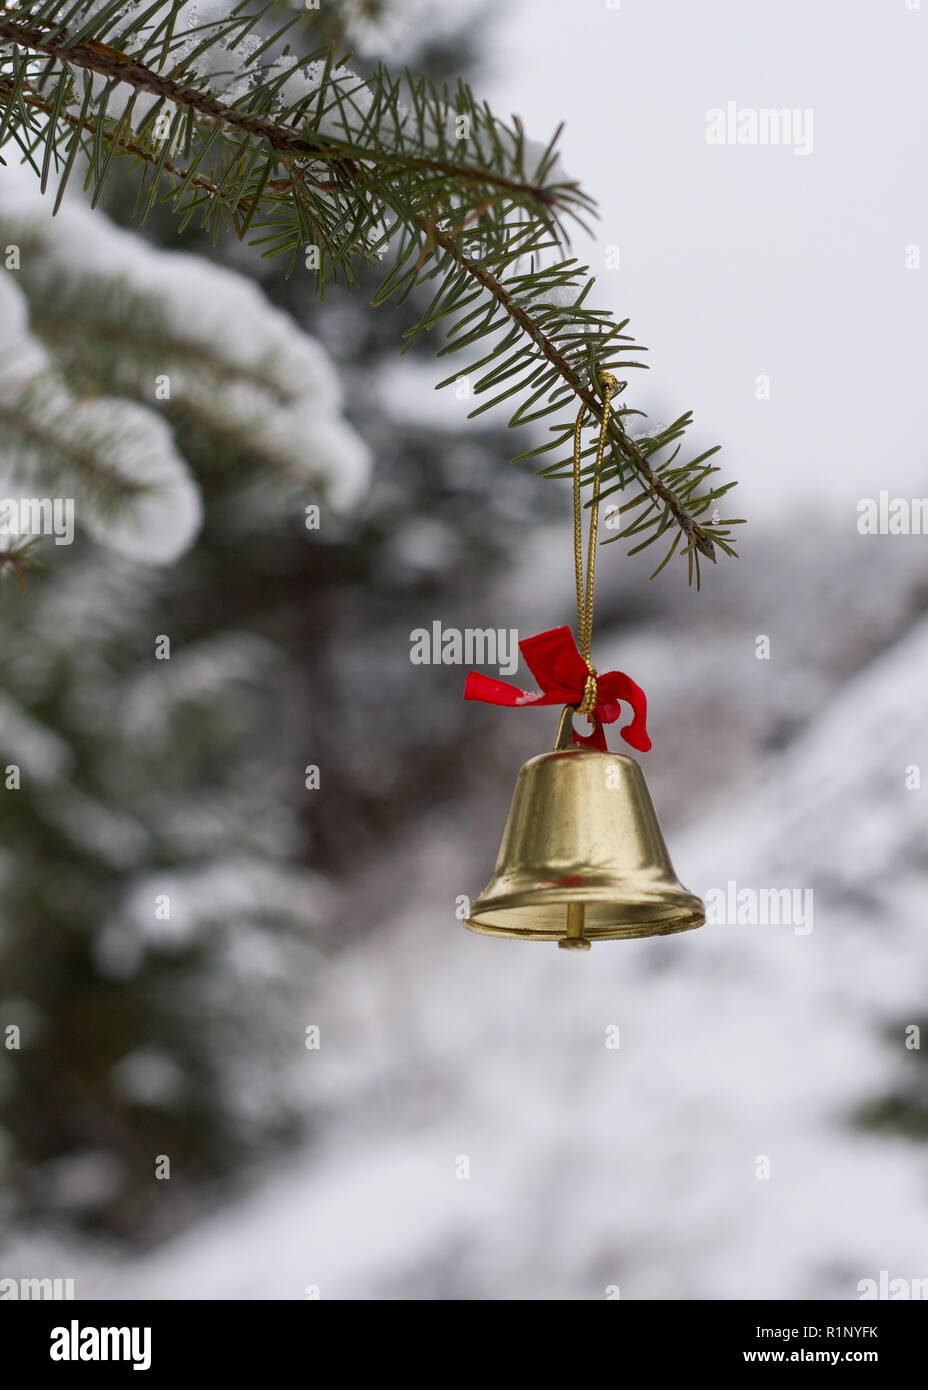 Golden metal bell with red ribbon hanging on the branch of a Fir tree outdoors on a snowy winter day Stock Photo